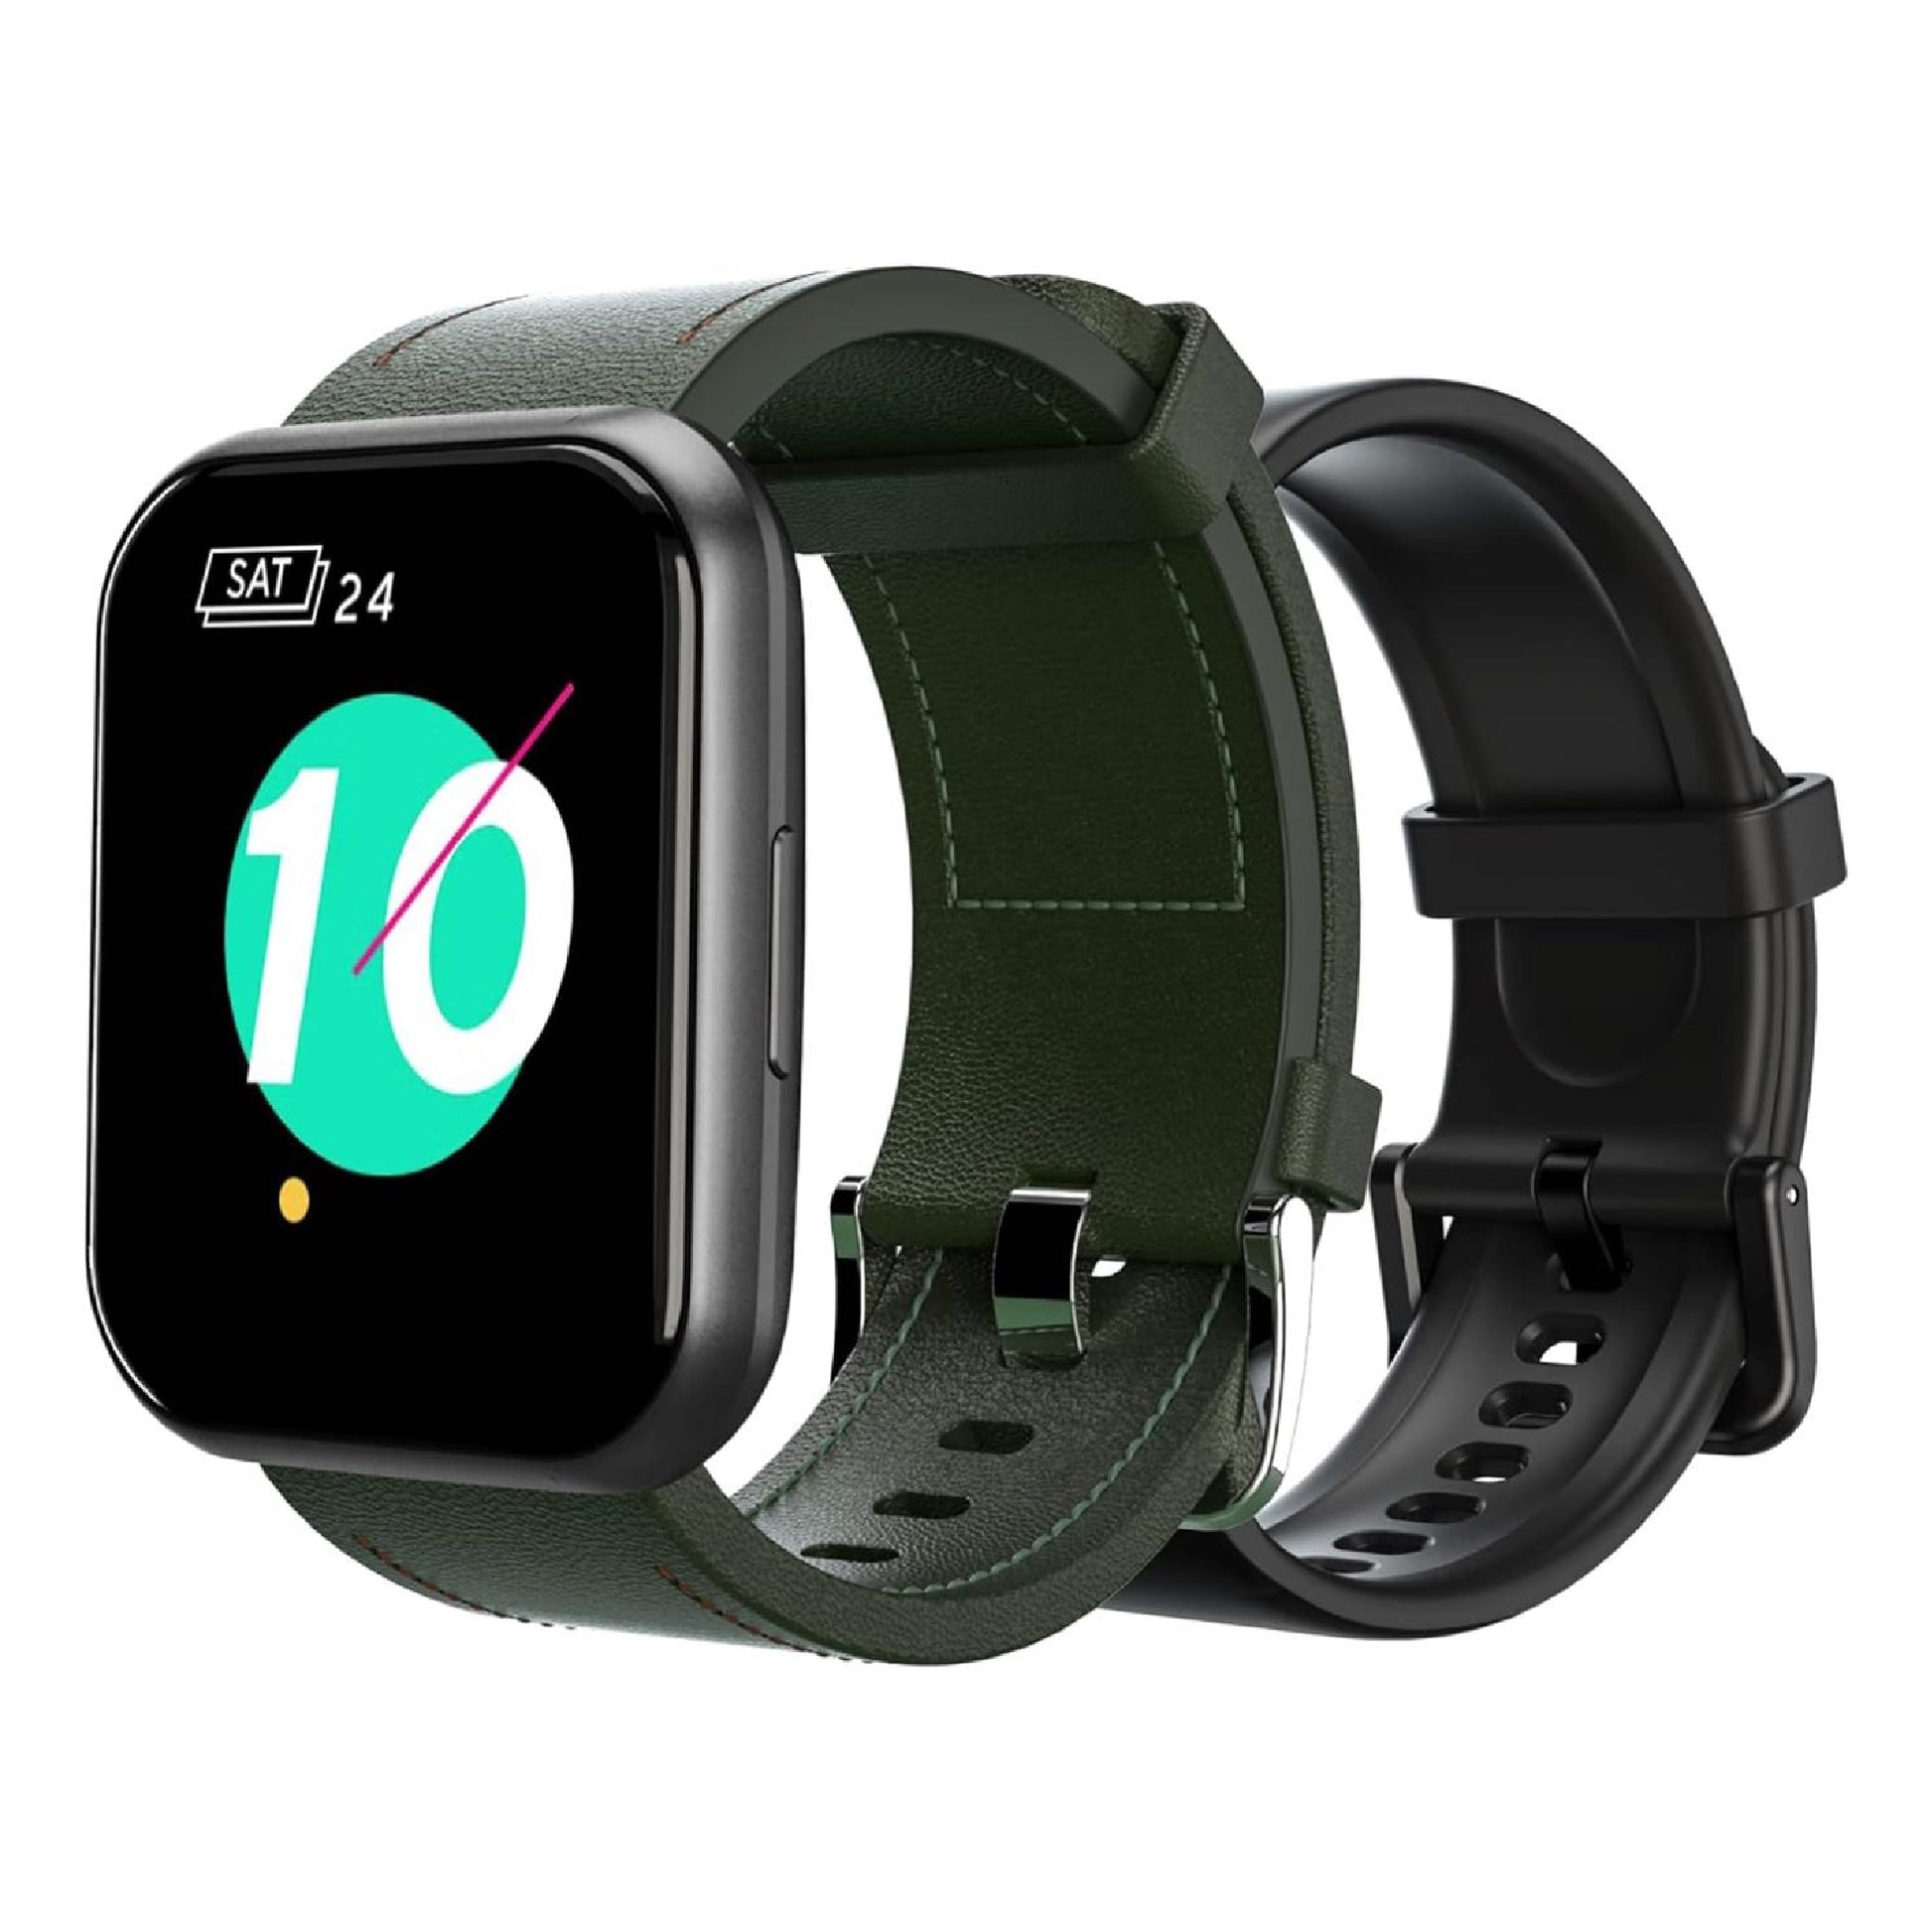 Black Wyze Watch 47c. Shows a forest green leather strap and smart digital interface with an app screen open. An additional black silicon strap is shown. 